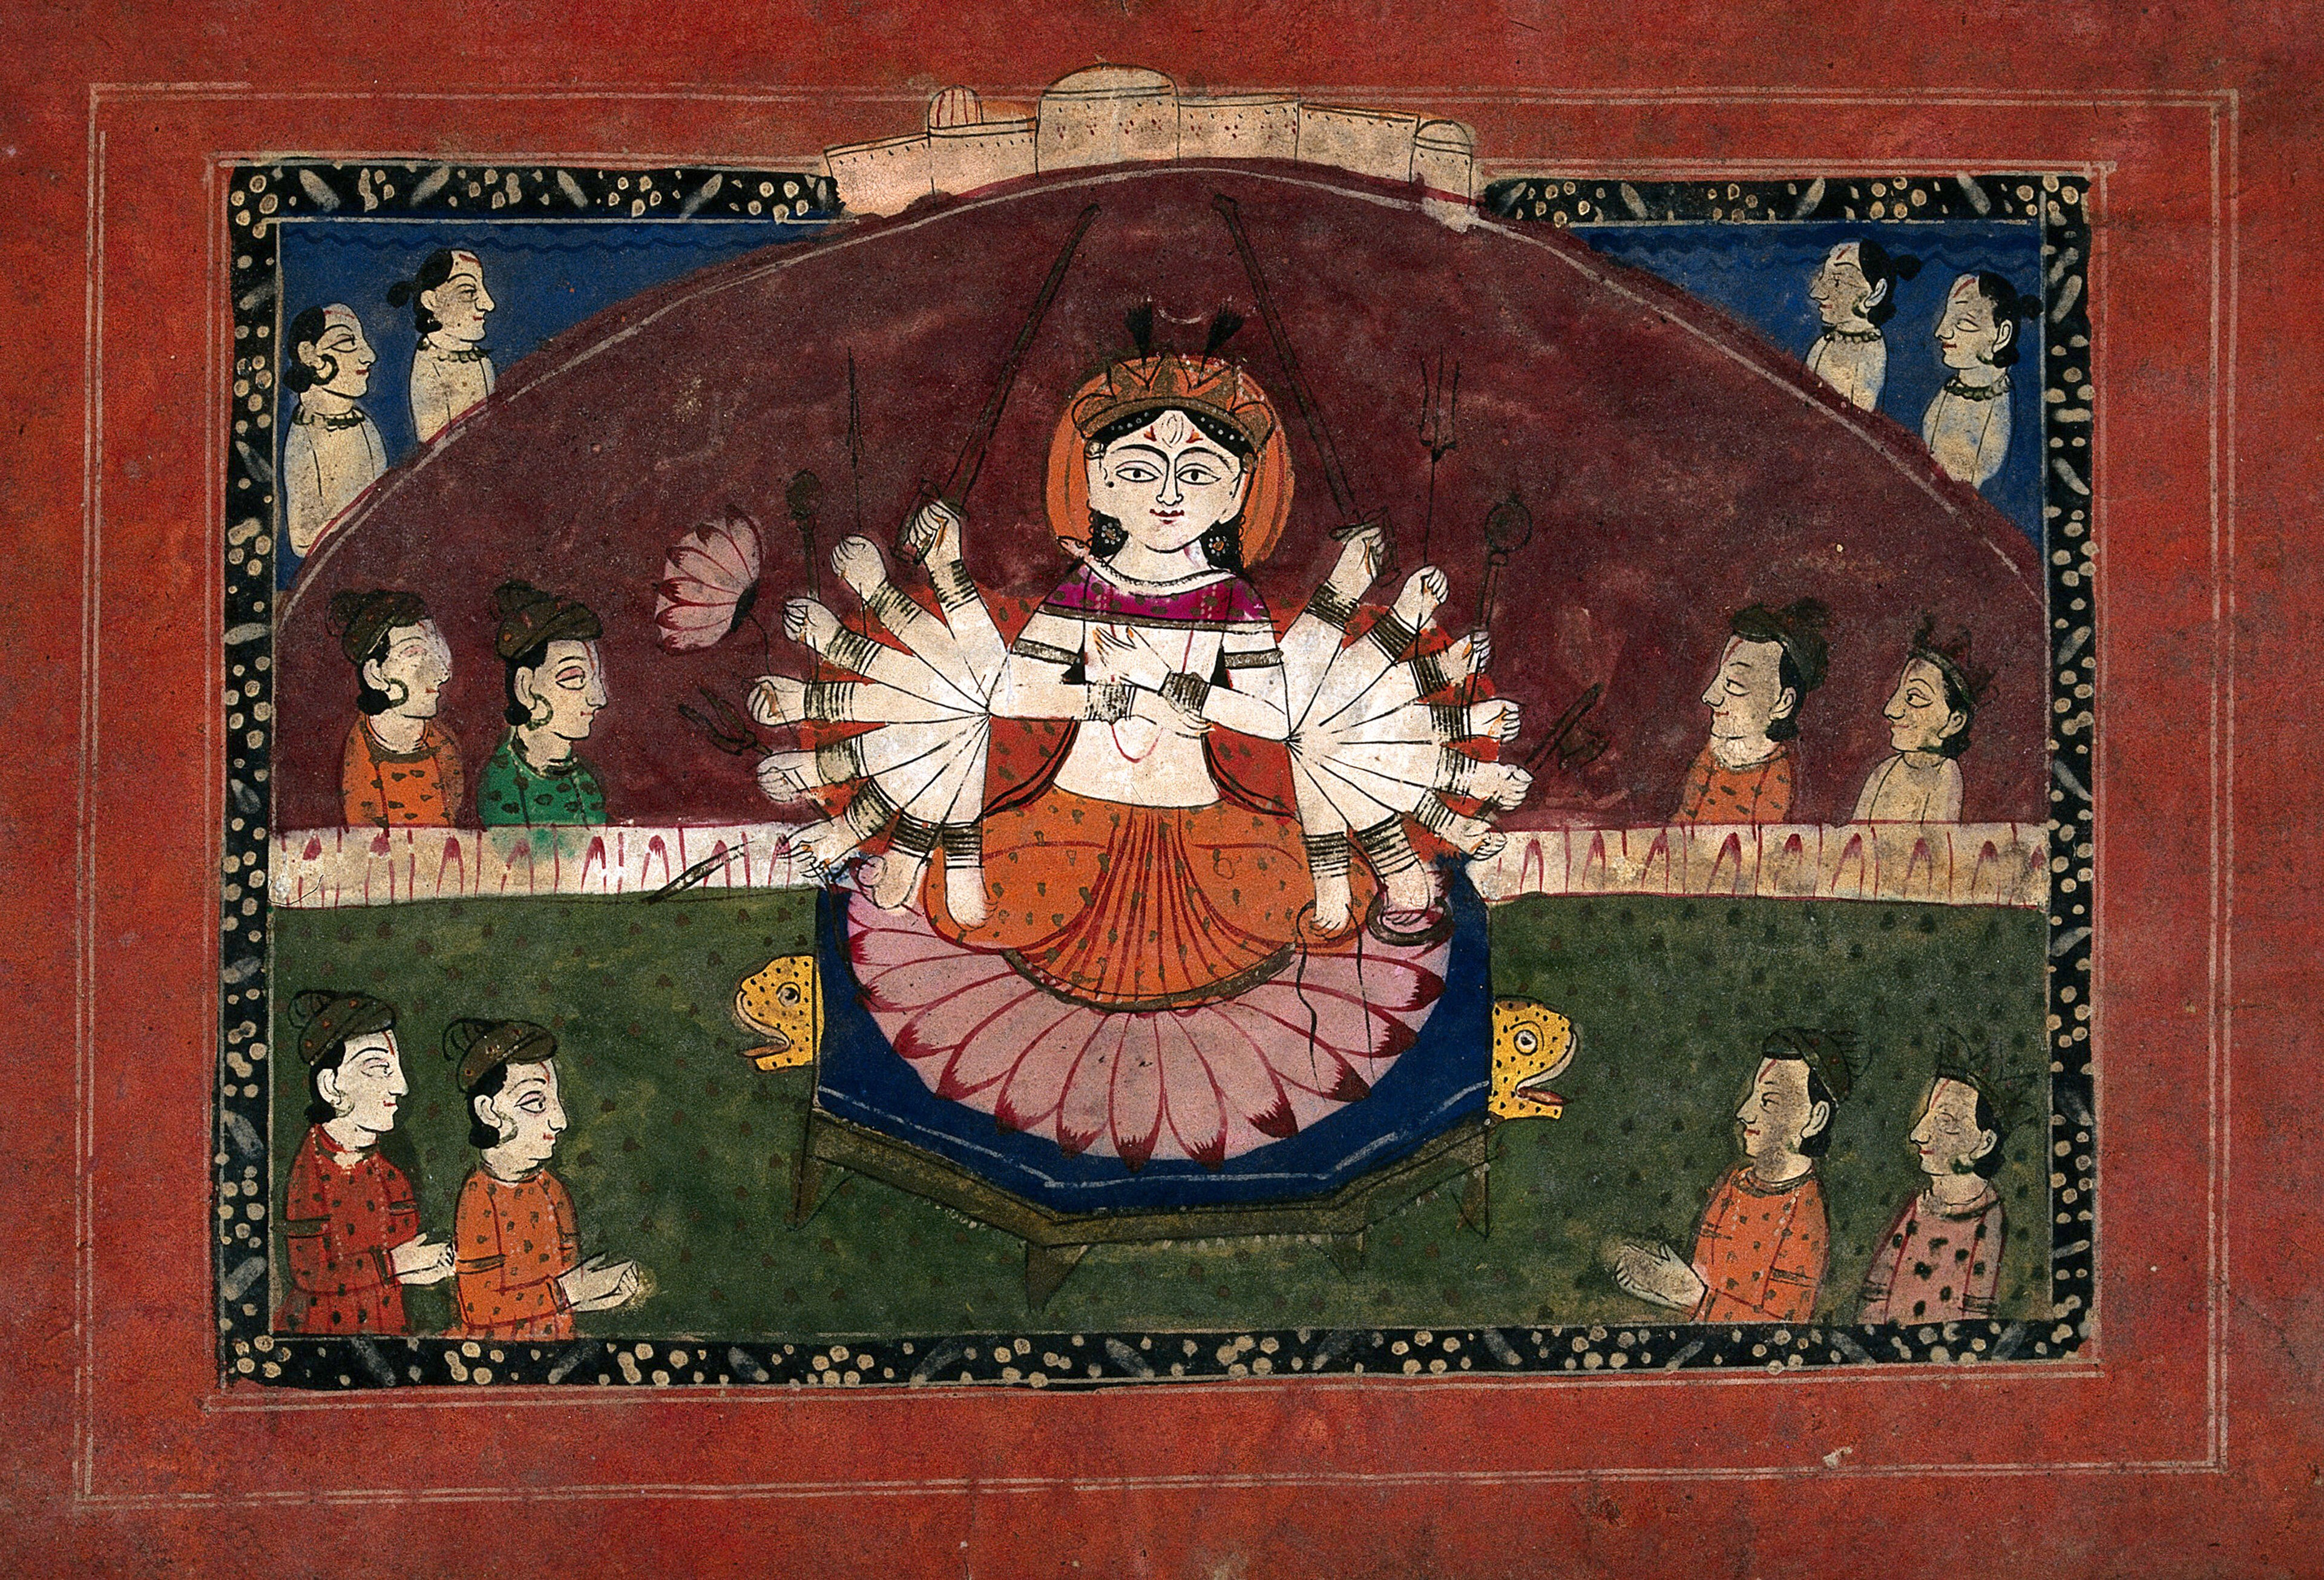 Durga on a lotus with all her weapons surrounded by devotees. Gouache drawing.